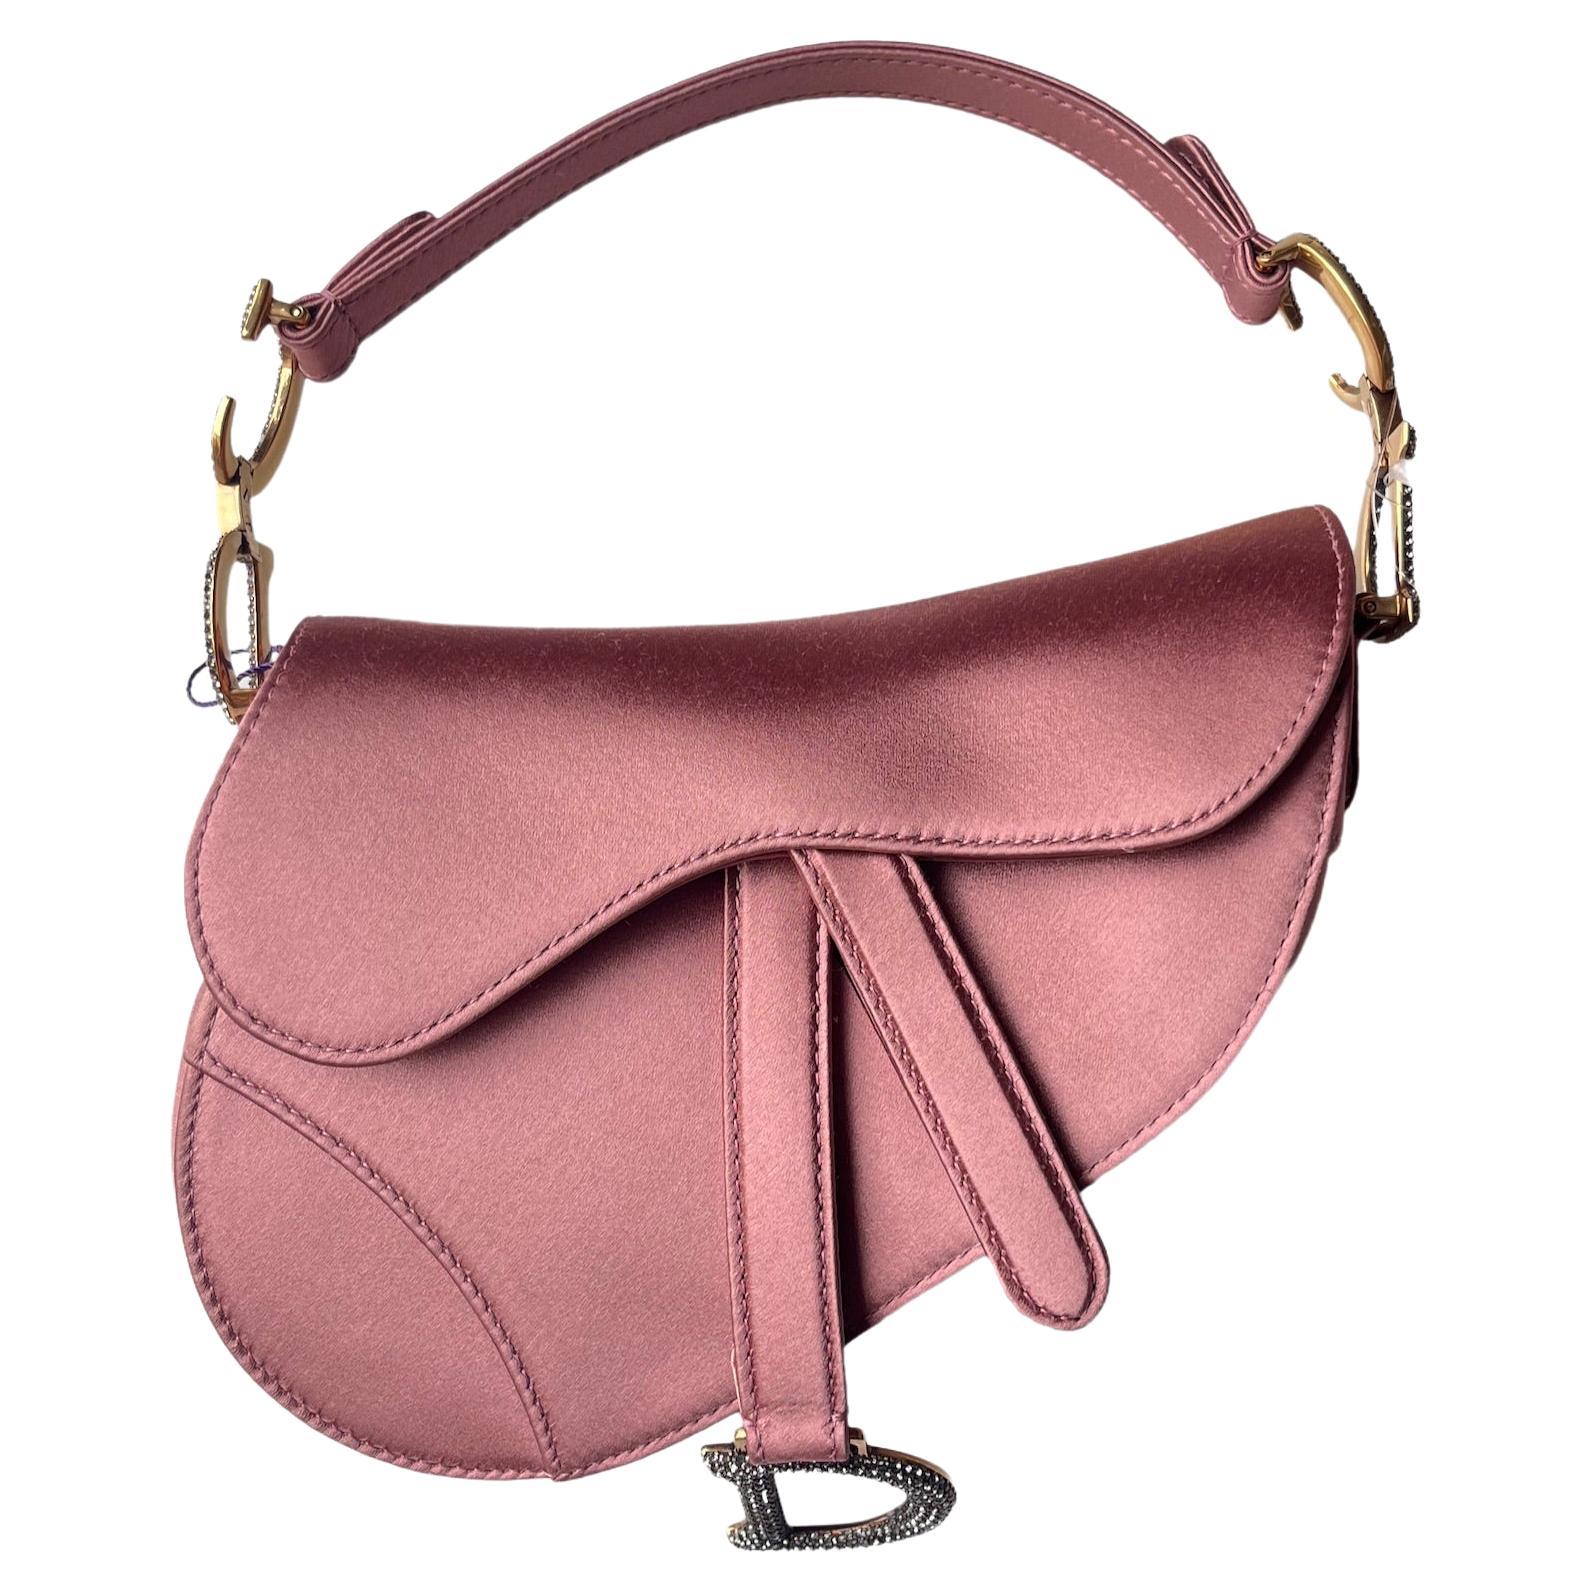 Does the Dior saddle bag come with a strap?